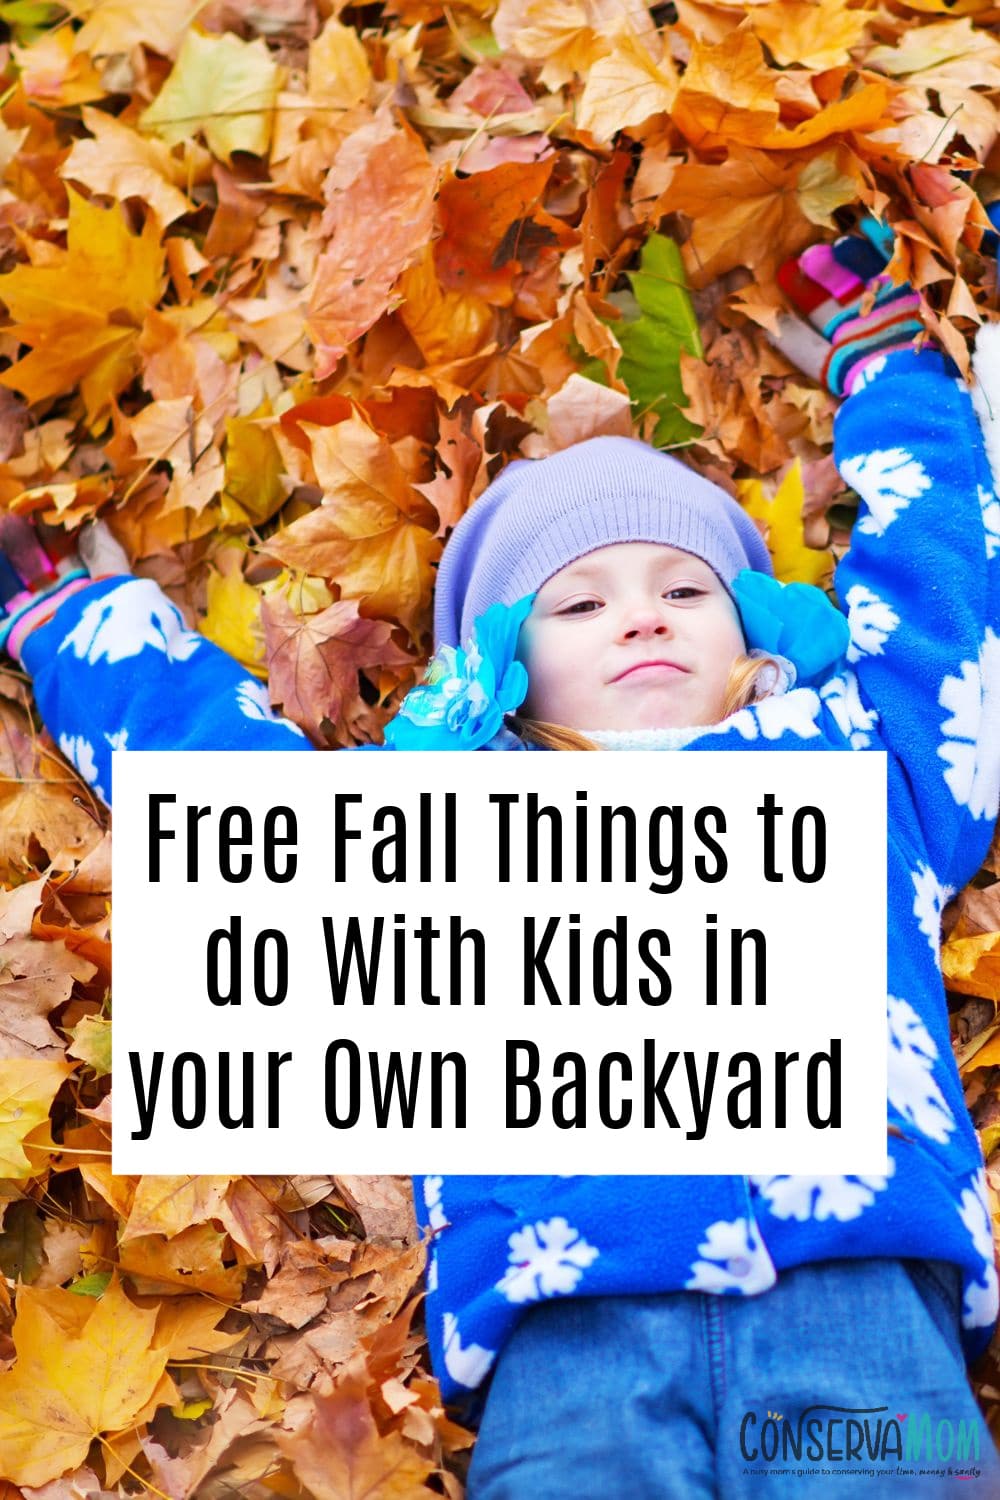 Free Fall Things to do With Kids in your Own Backyard